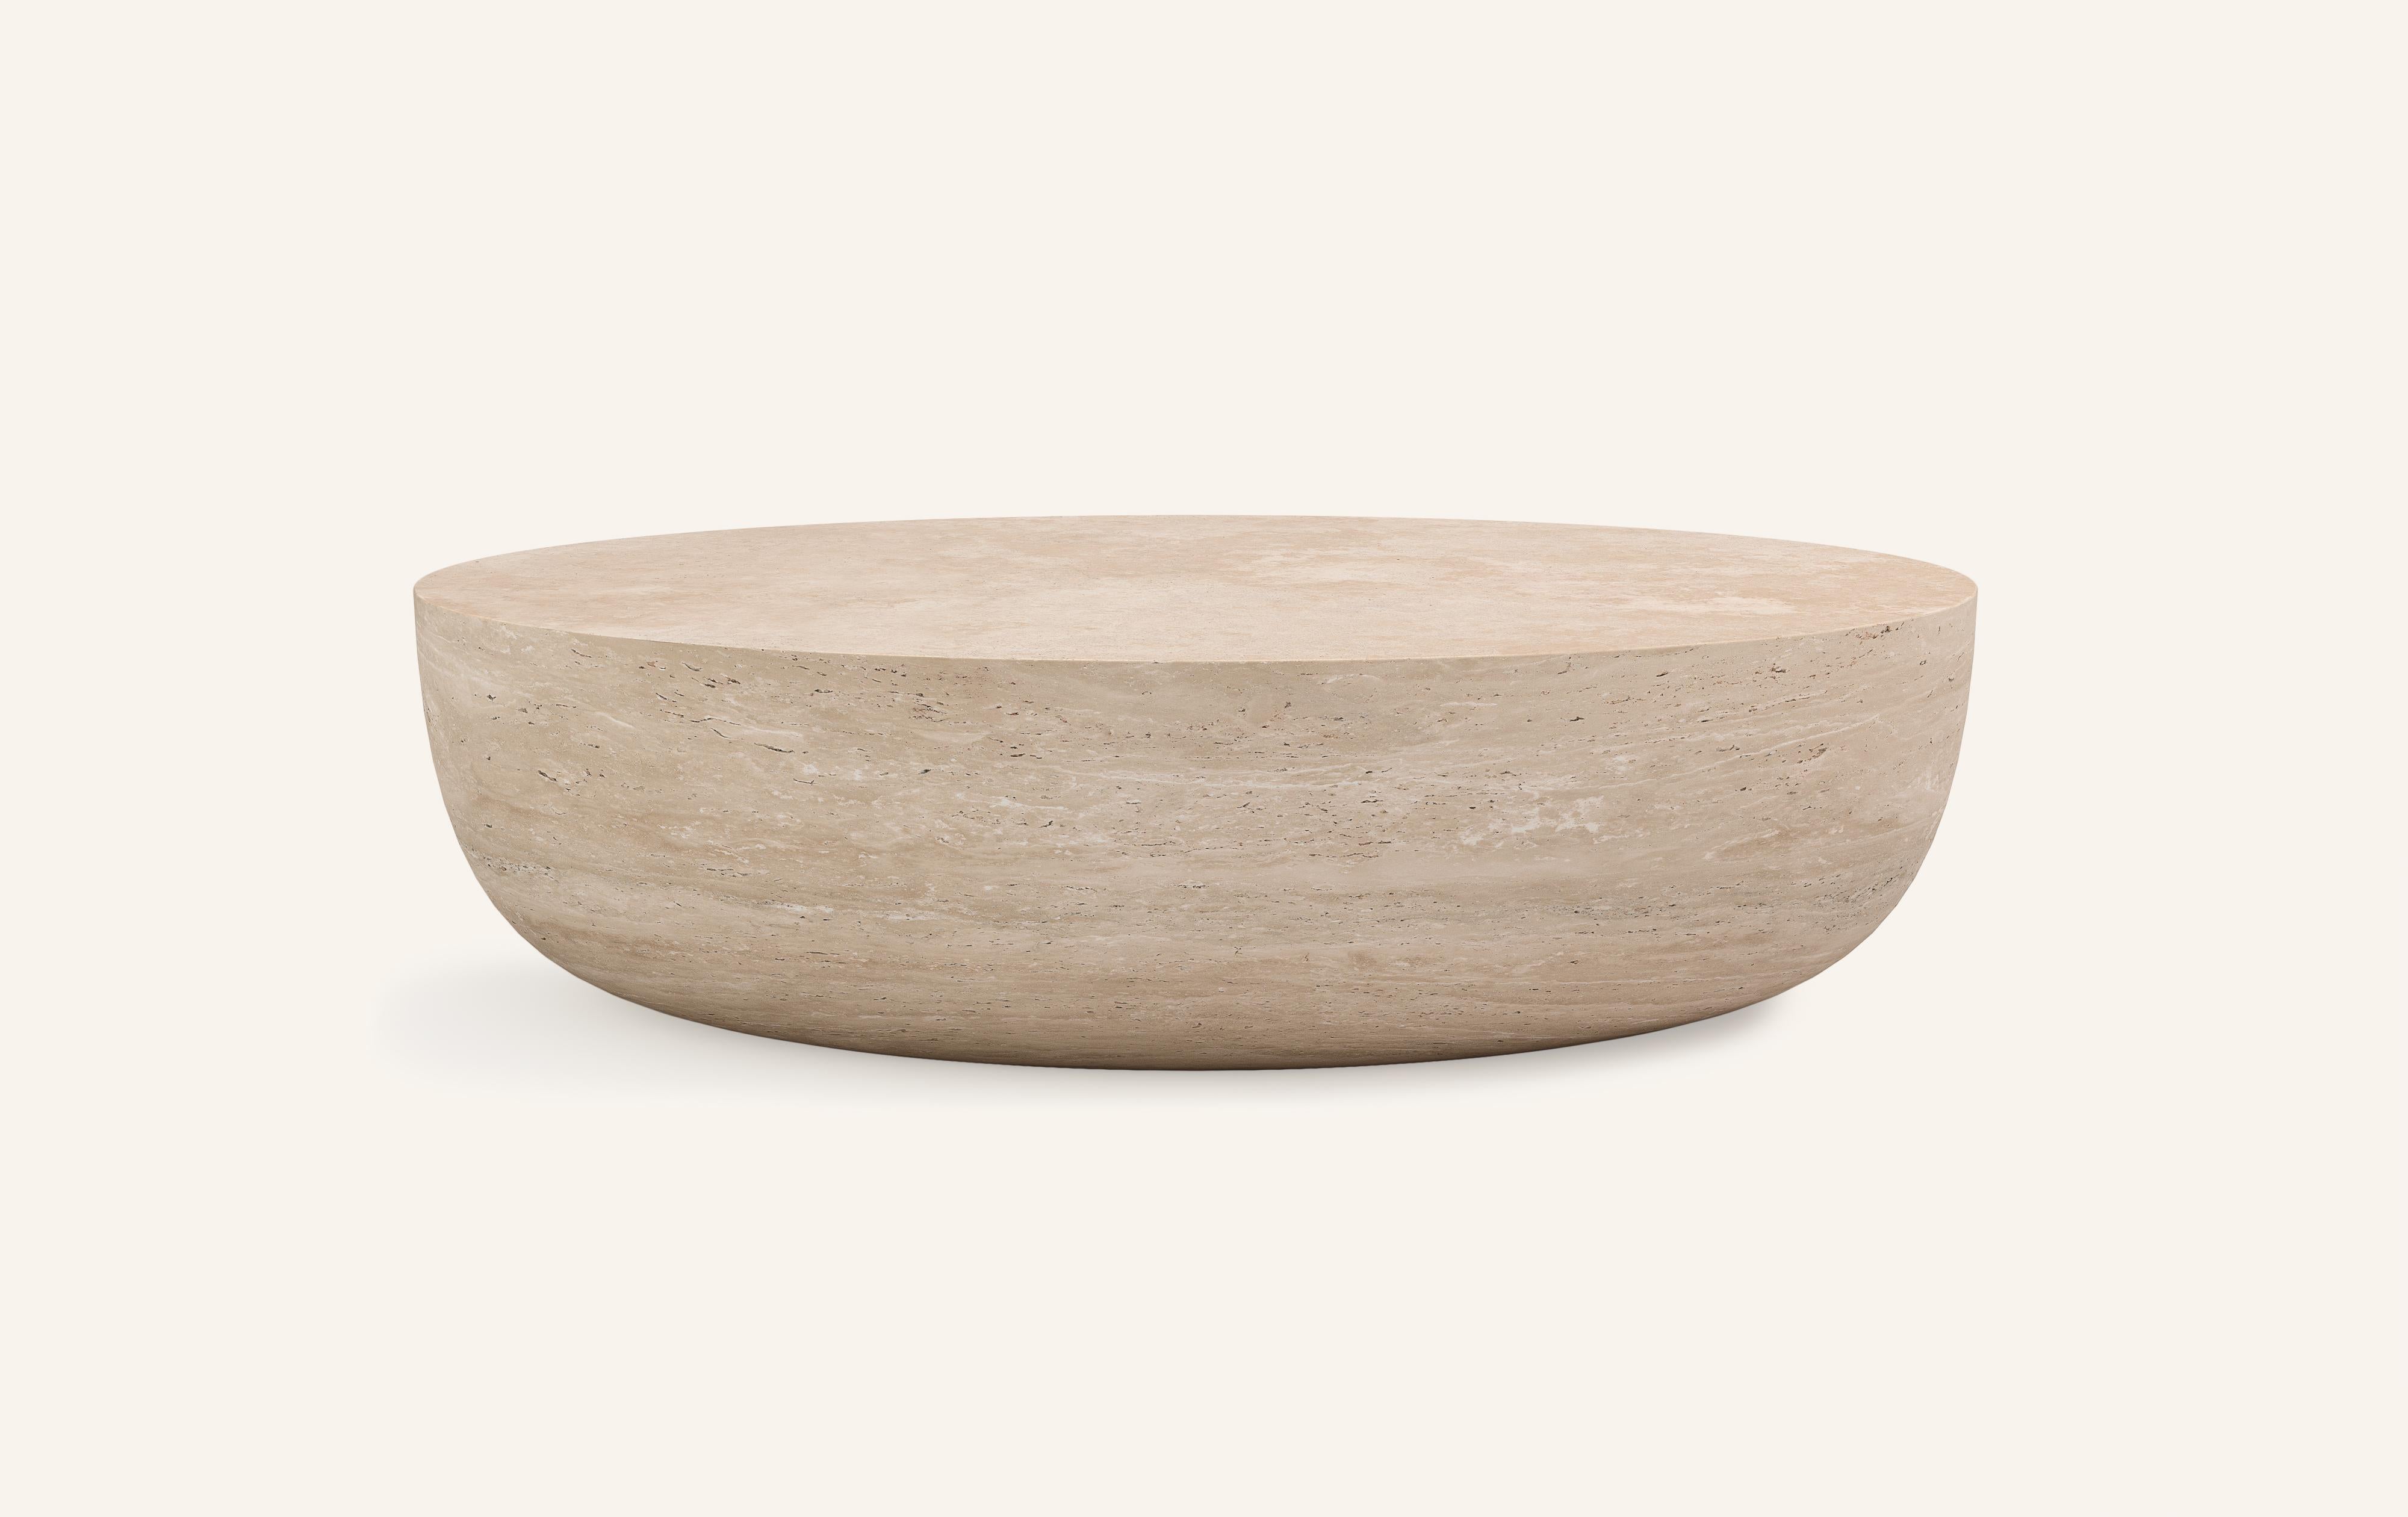 A SLICE OF A ’SPHERE’ OR 'SFERA' IN ITALIAN BALANCES A FLAT SURFACE ATOP AND ROBUST MONOLITH FORM. WITH A BASE SOFTENED BY A CURVED PROFILE, SFERA IS SOFT AND EARTHY IN ITS AVAILABLE STONE SELECTIONS.

DIMENSIONS: 
60”L x 42”W x 16”H: 
- SOLID BLOCK